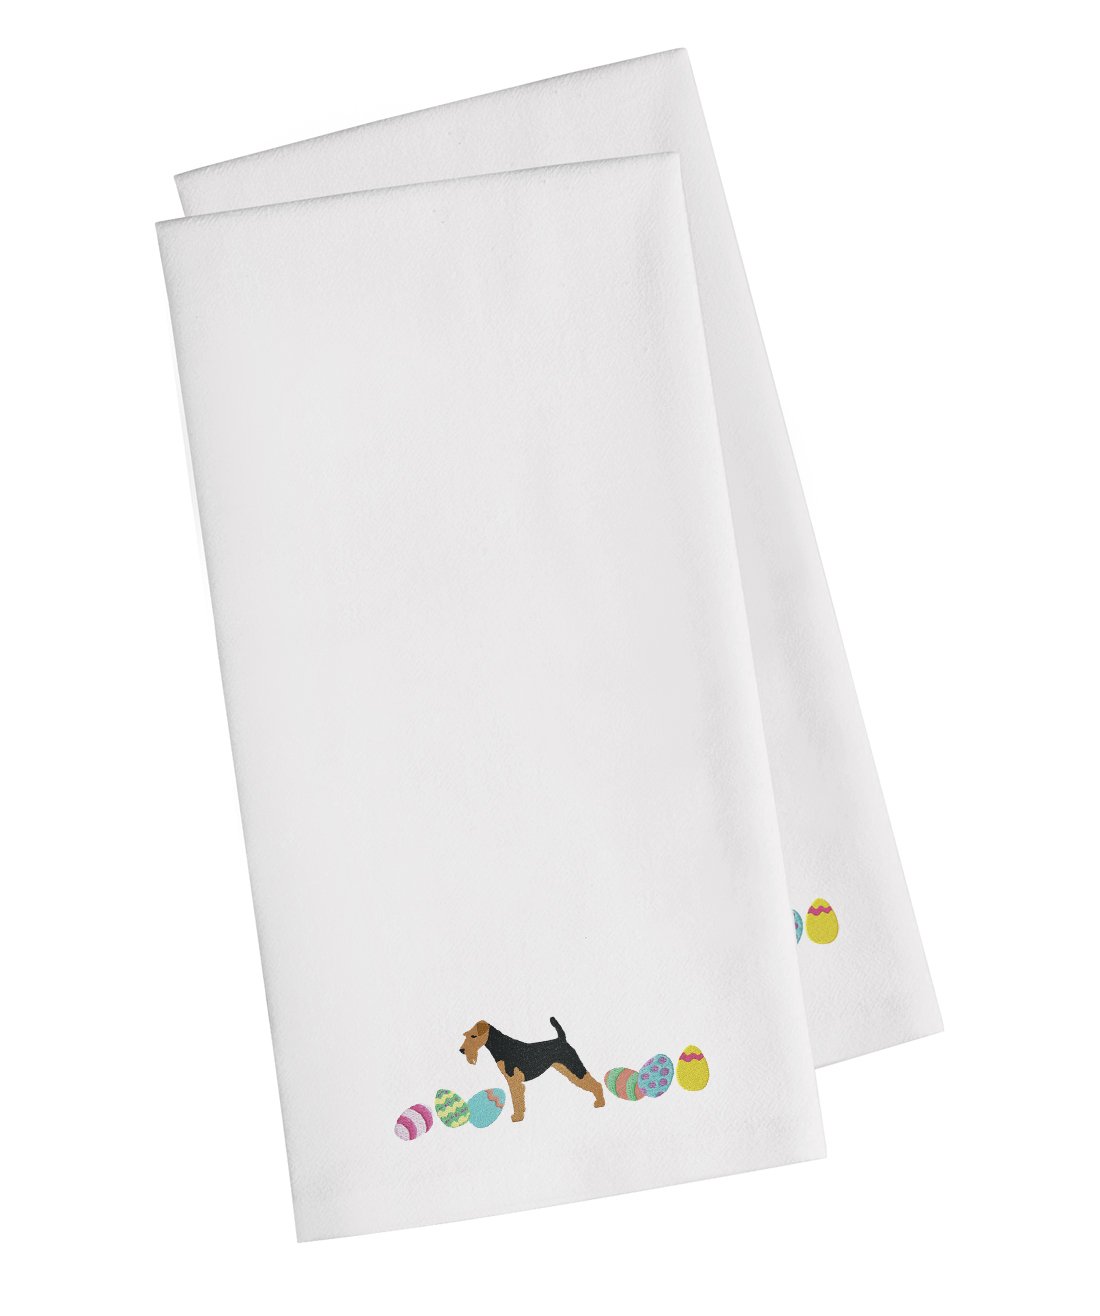 Airedale Terrier Easter White Embroidered Kitchen Towel Set of 2 CK1594WHTWE by Caroline's Treasures